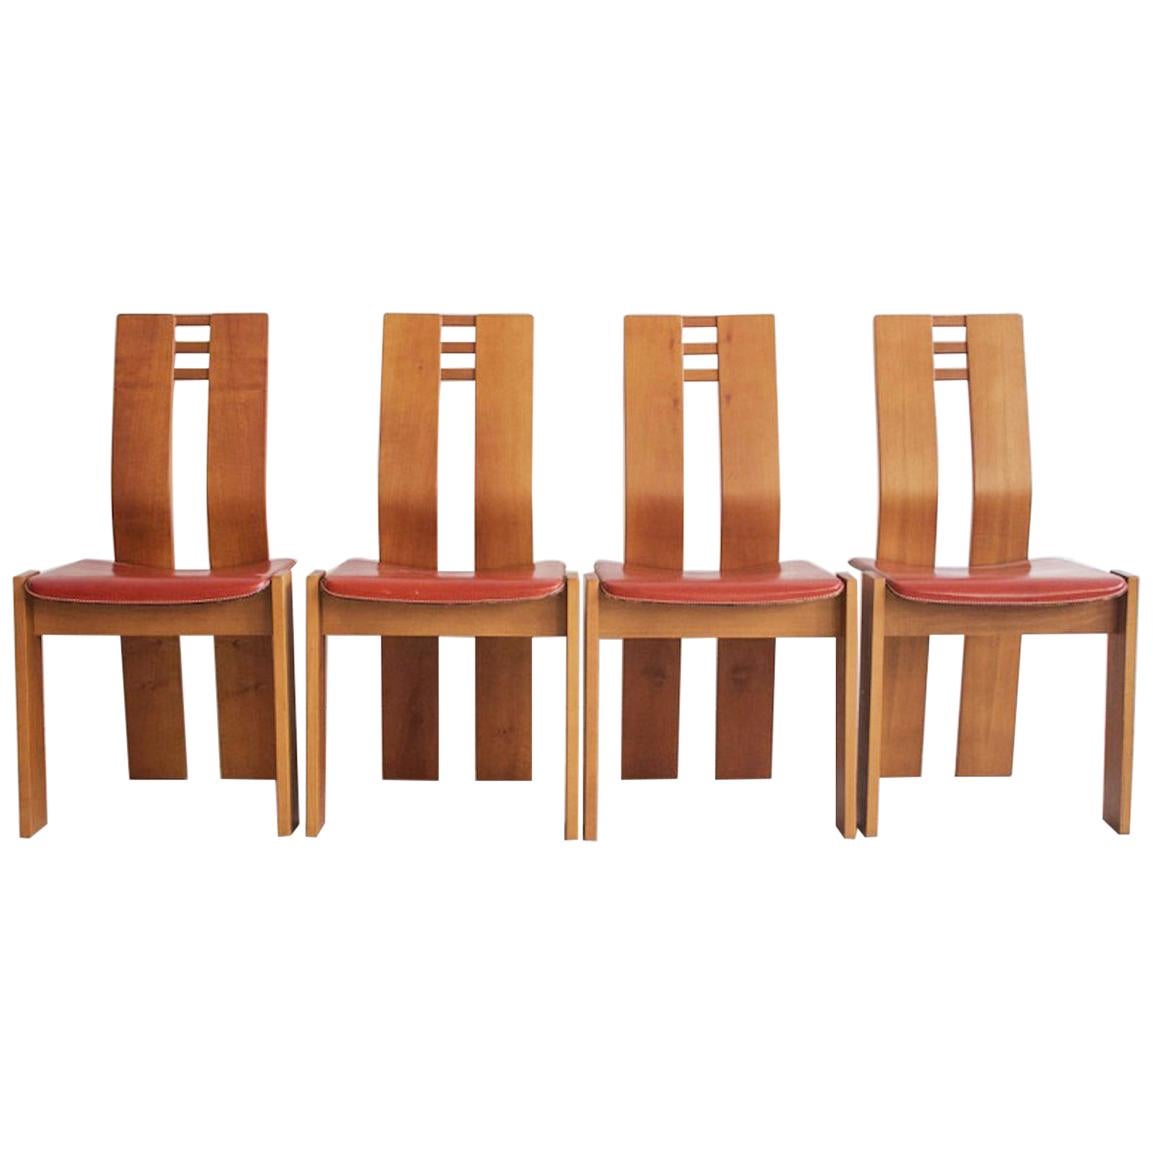 Set of Four Wooden Dining Chairs, 1950s